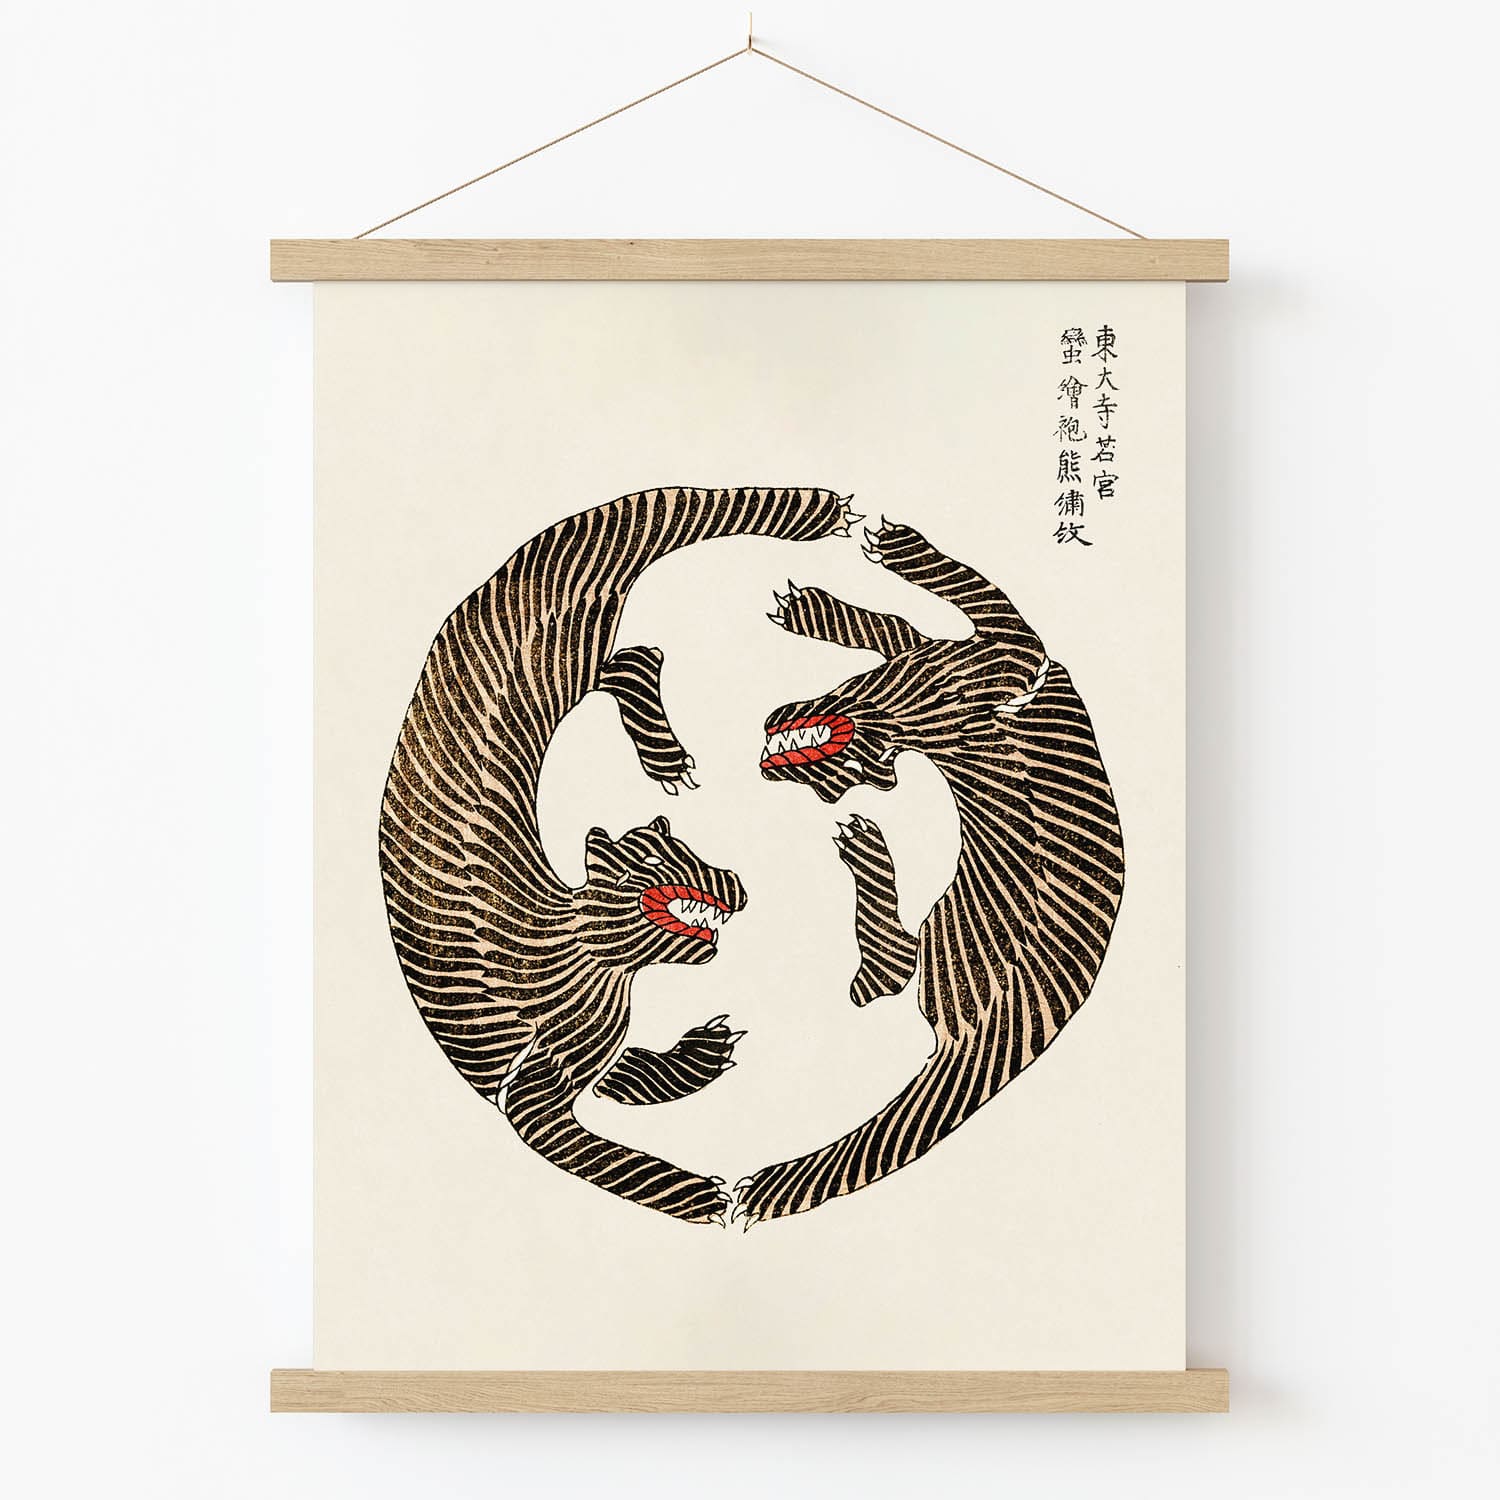 Two Tigers in a Circle Art Print in Wood Hanger Frame on Wall